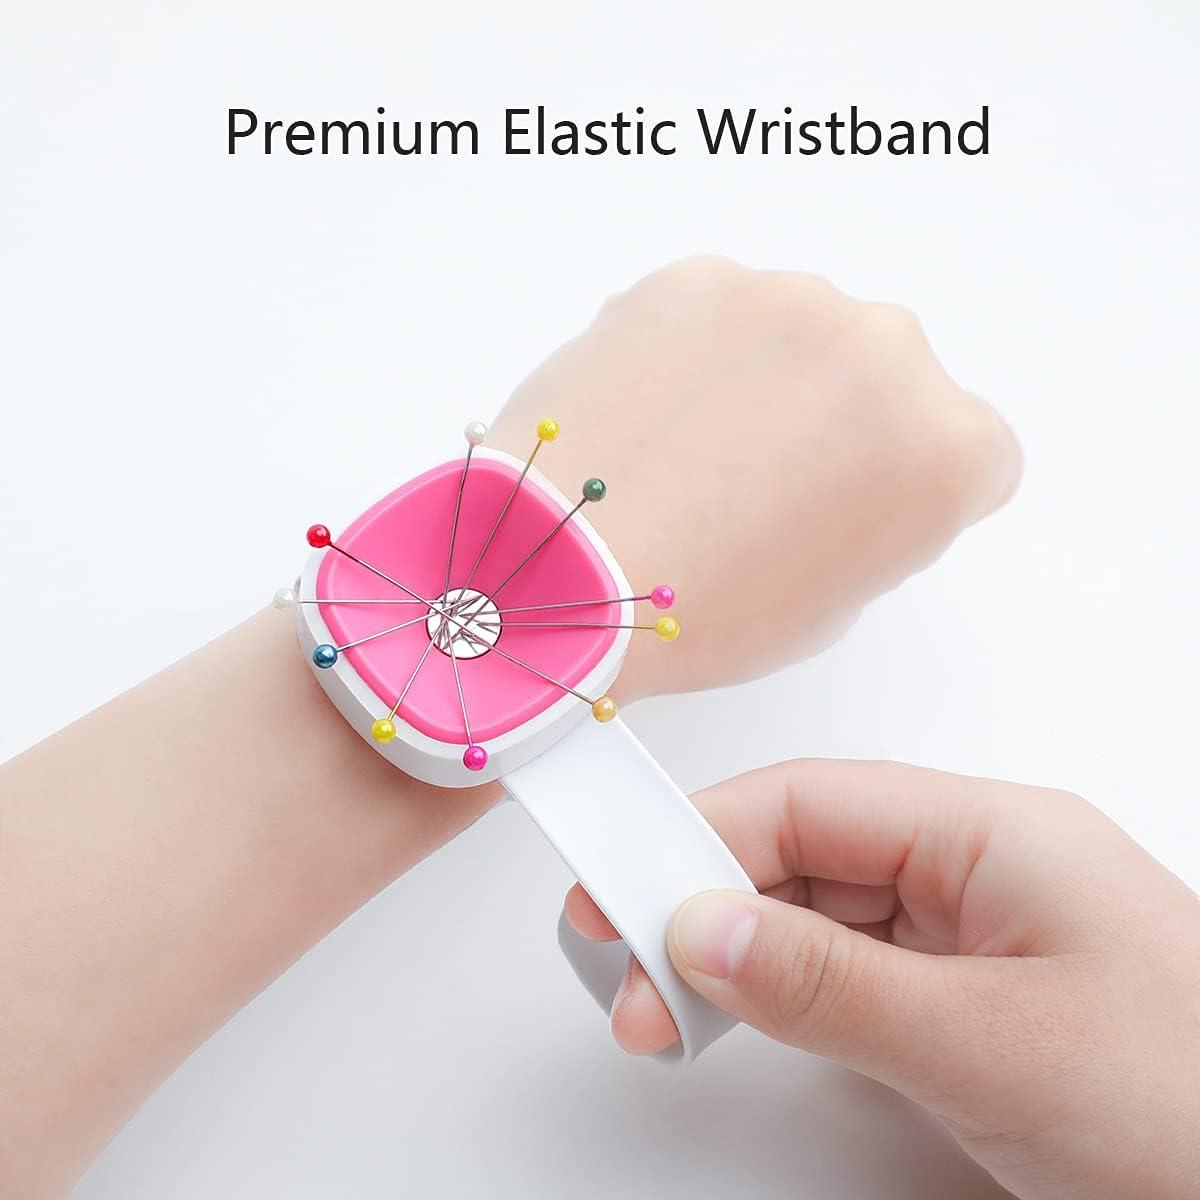 FRCOLOR wrist bands wrist brace silicone bracelet with pin holder wrist pin  cushion pin cushions for sewing wrist strap pin holder magnet needle